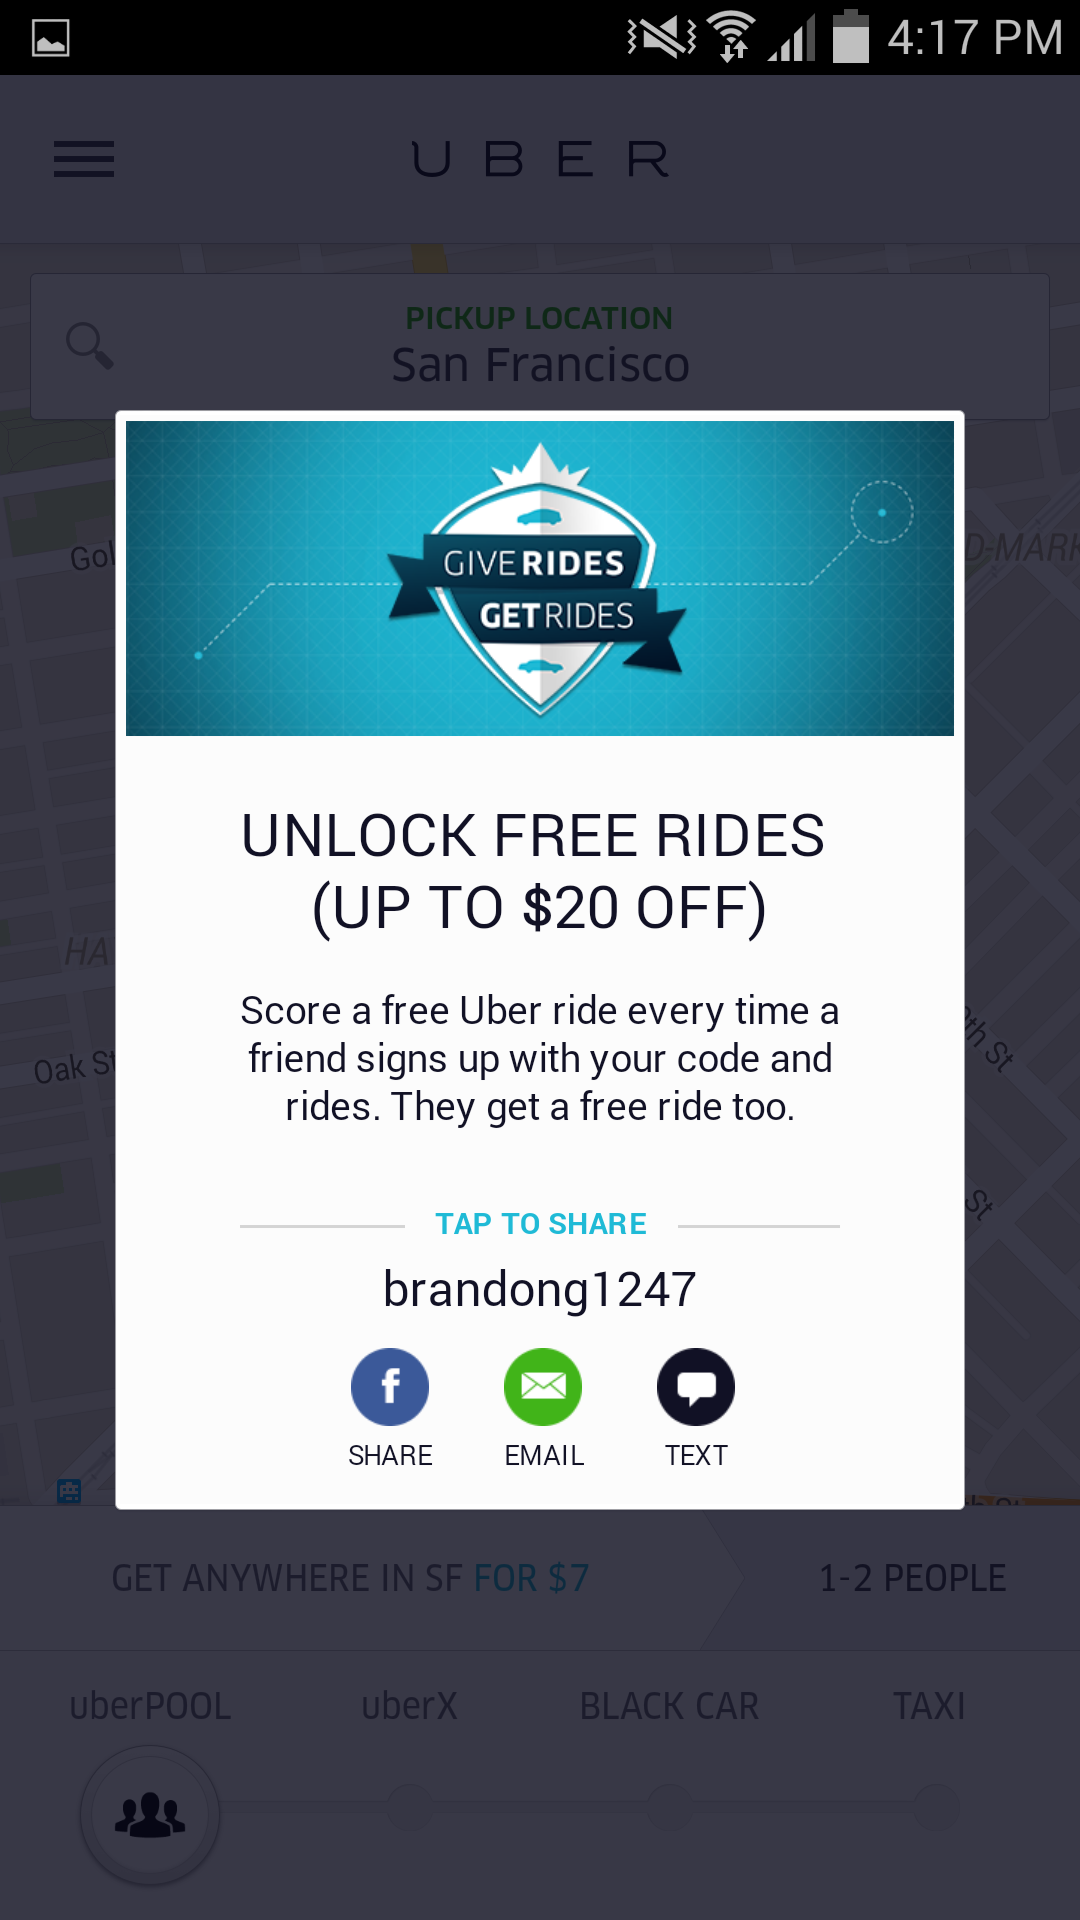 Uber refer a friend and get a free ride